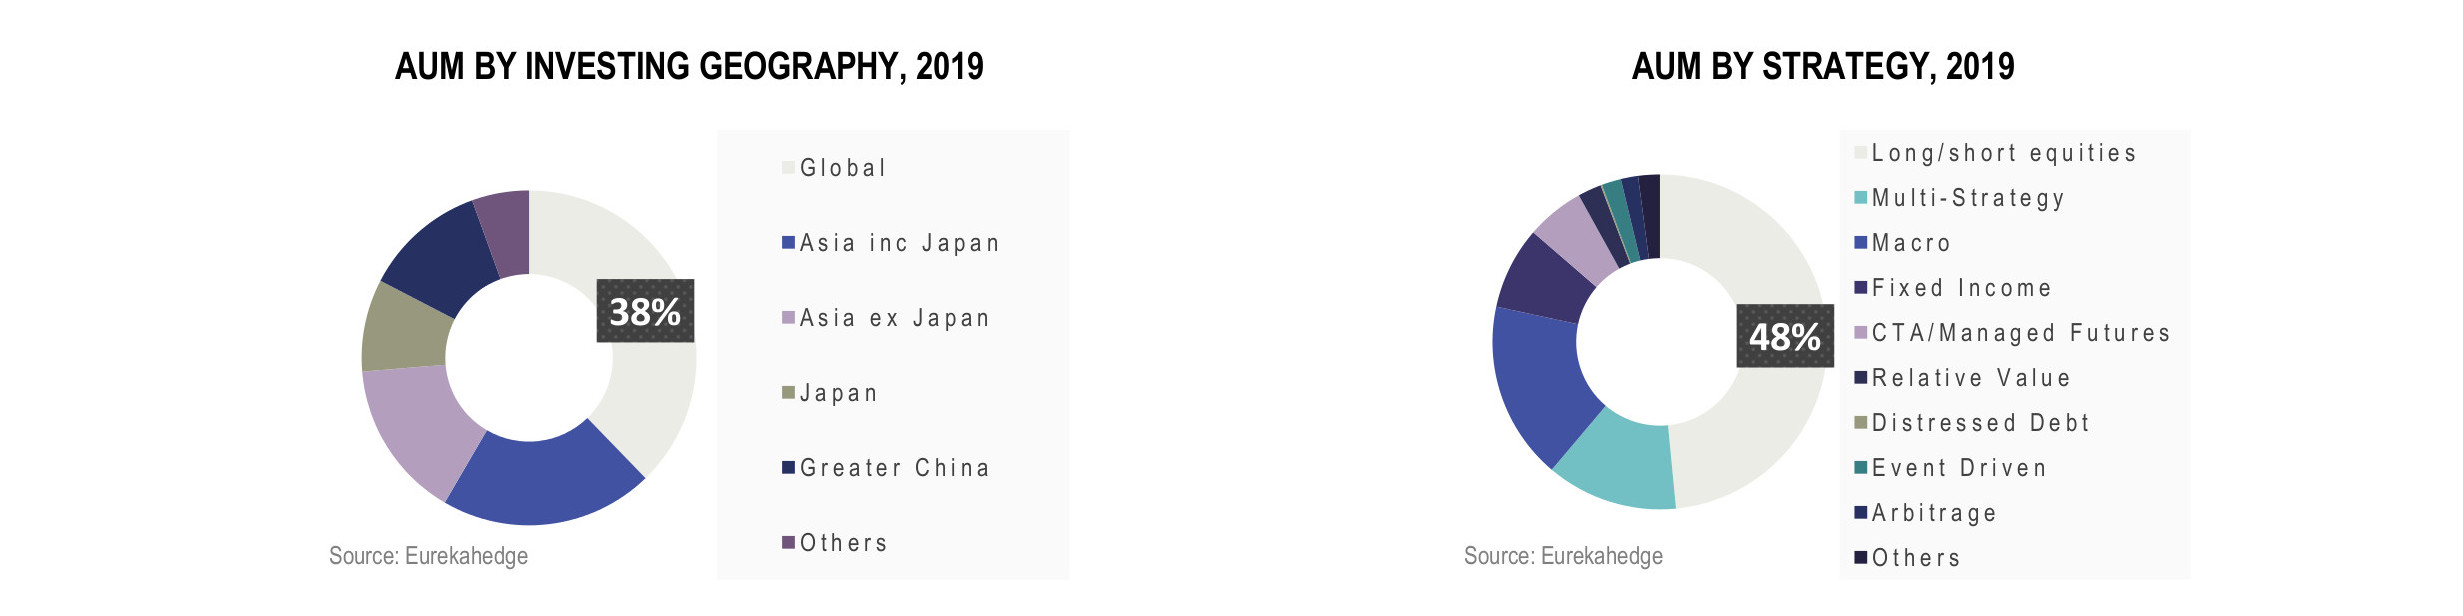 Asian Hedge Funds Infographic September 2019 - AUM by investing geography and AUM by strategy 2019